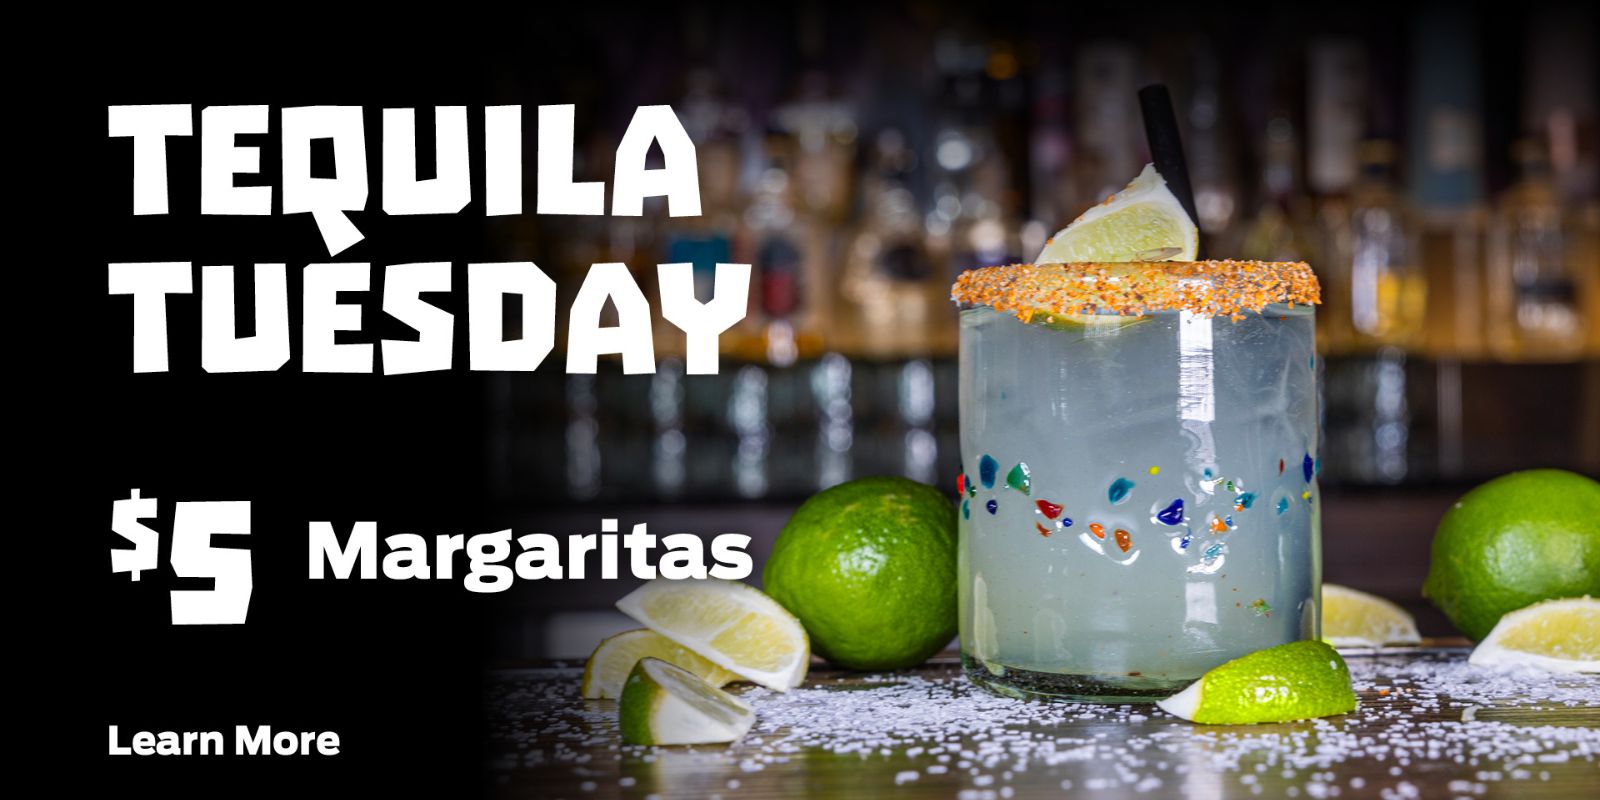 Tequila Tuesdays, $5 Margaritas all day at Uno Mas